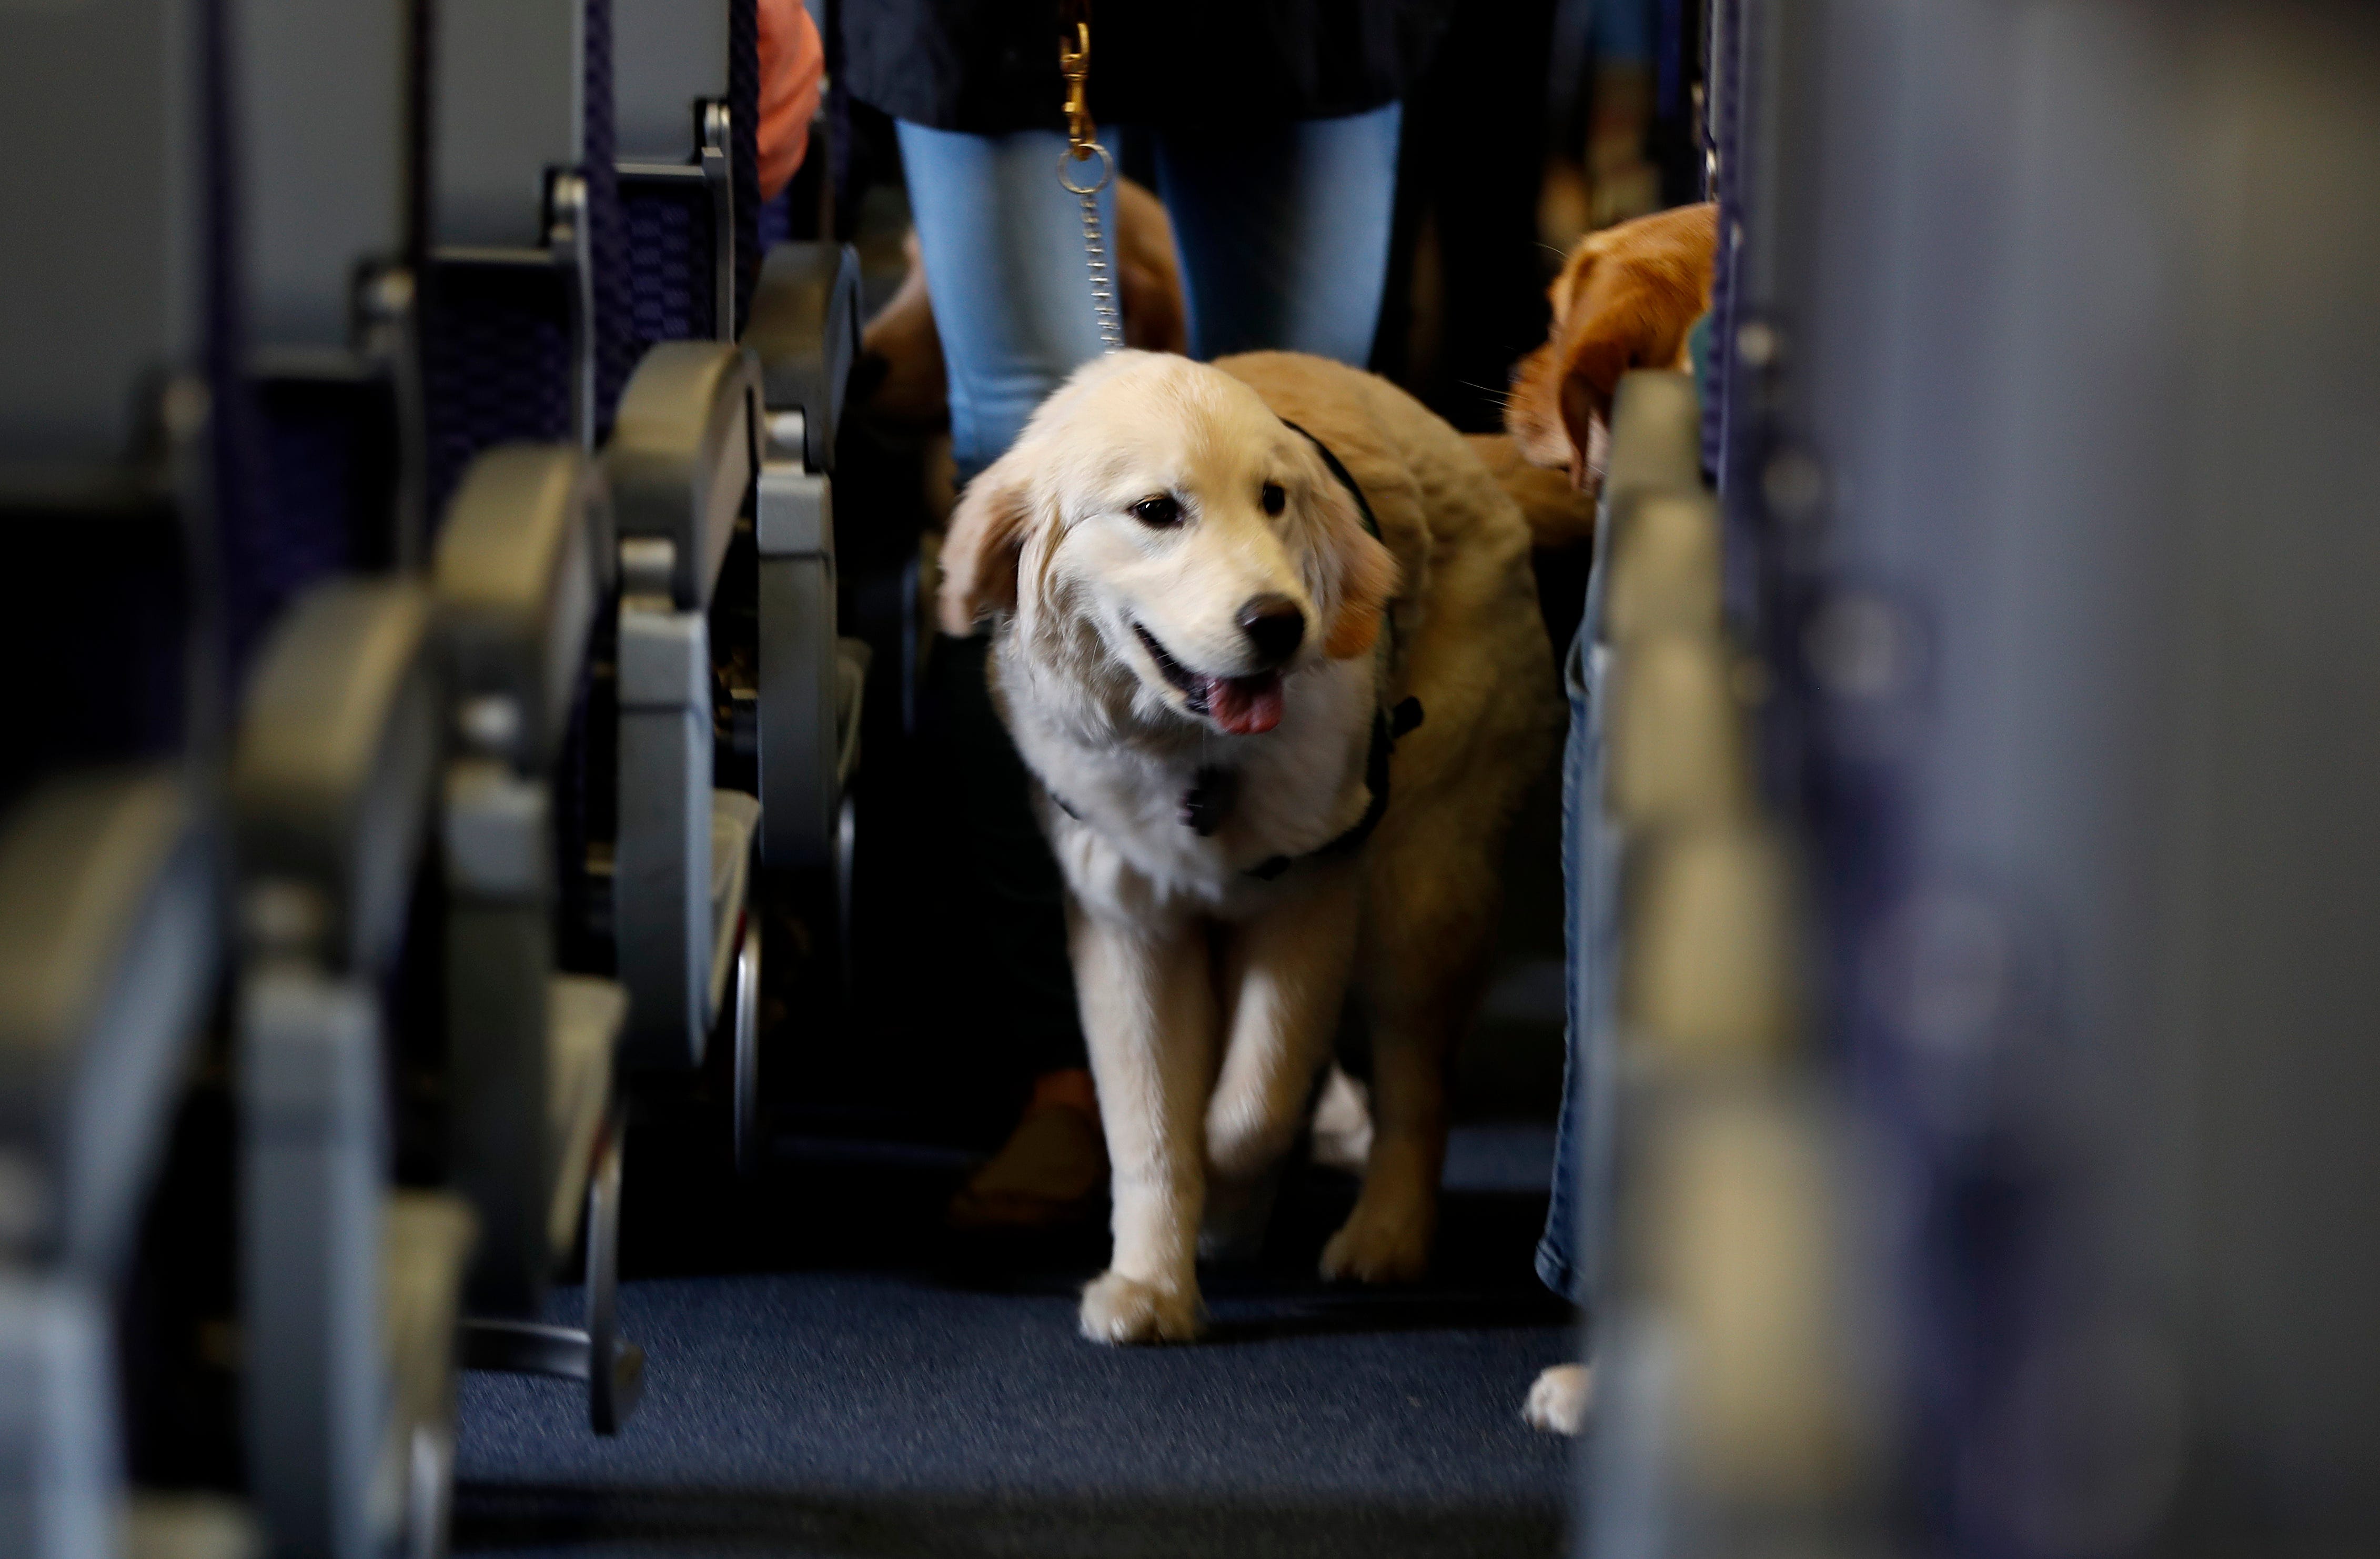 southwest airline emotional support animal